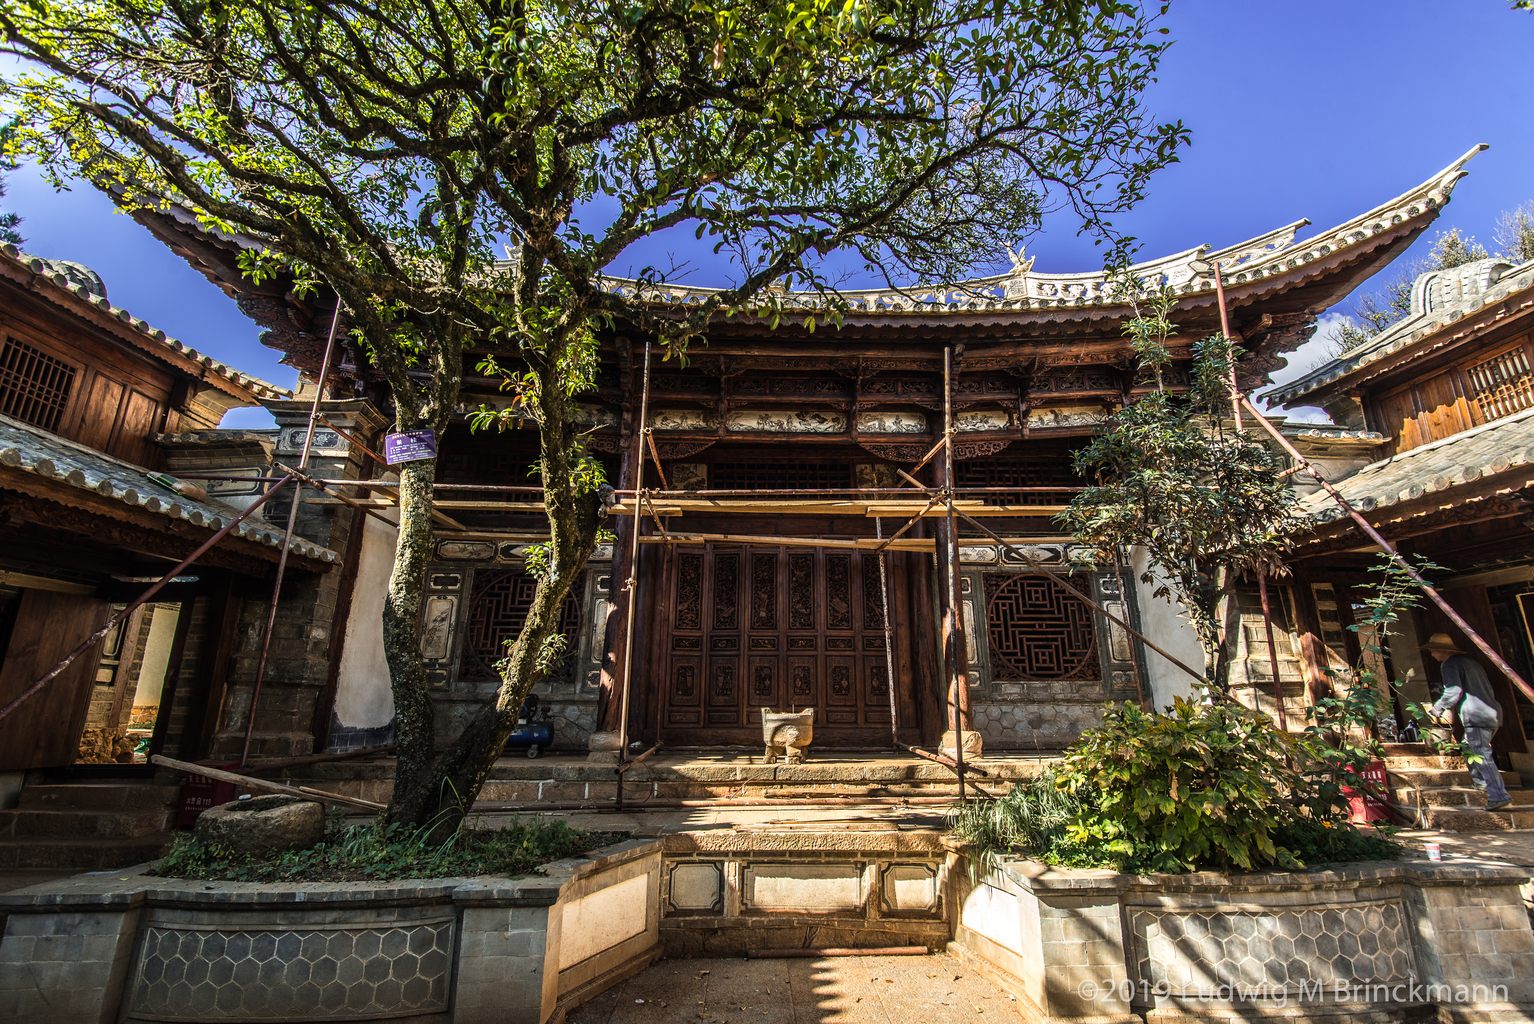 Picture: A Tang dynasty temple near Fengyu.